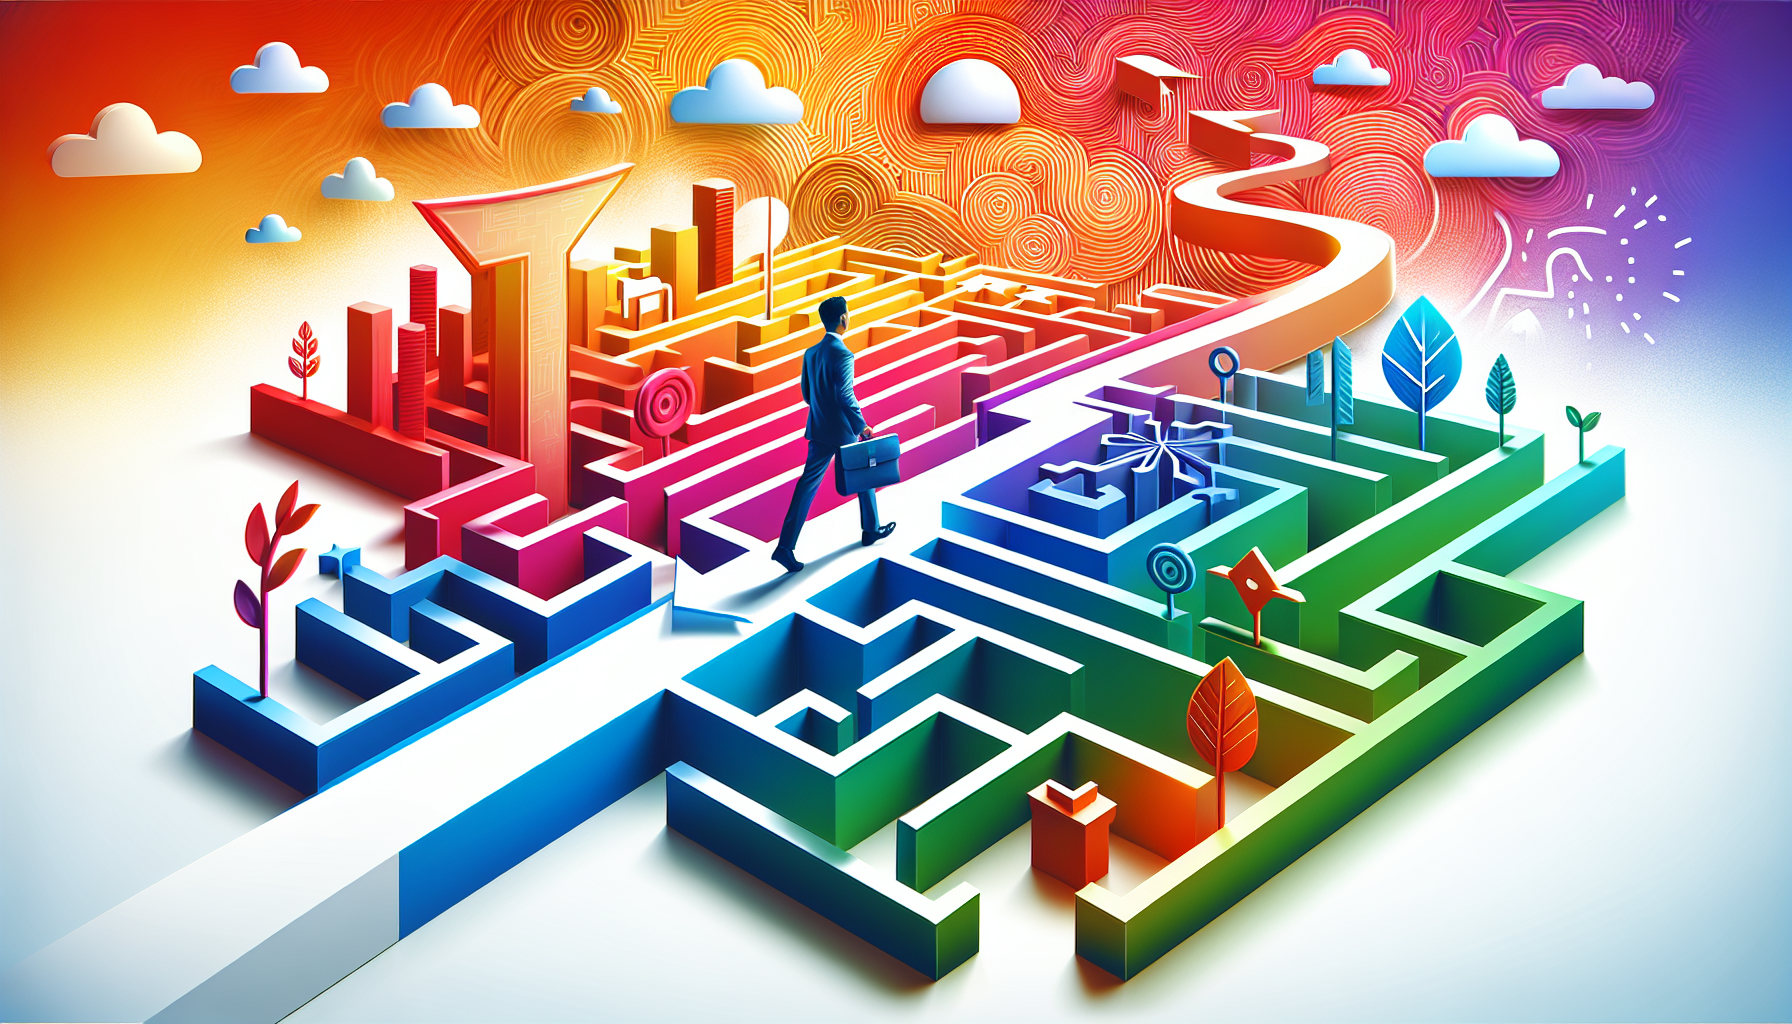 A cover image featuring a person navigating a maze, symbolizing the job market. The maze can have el